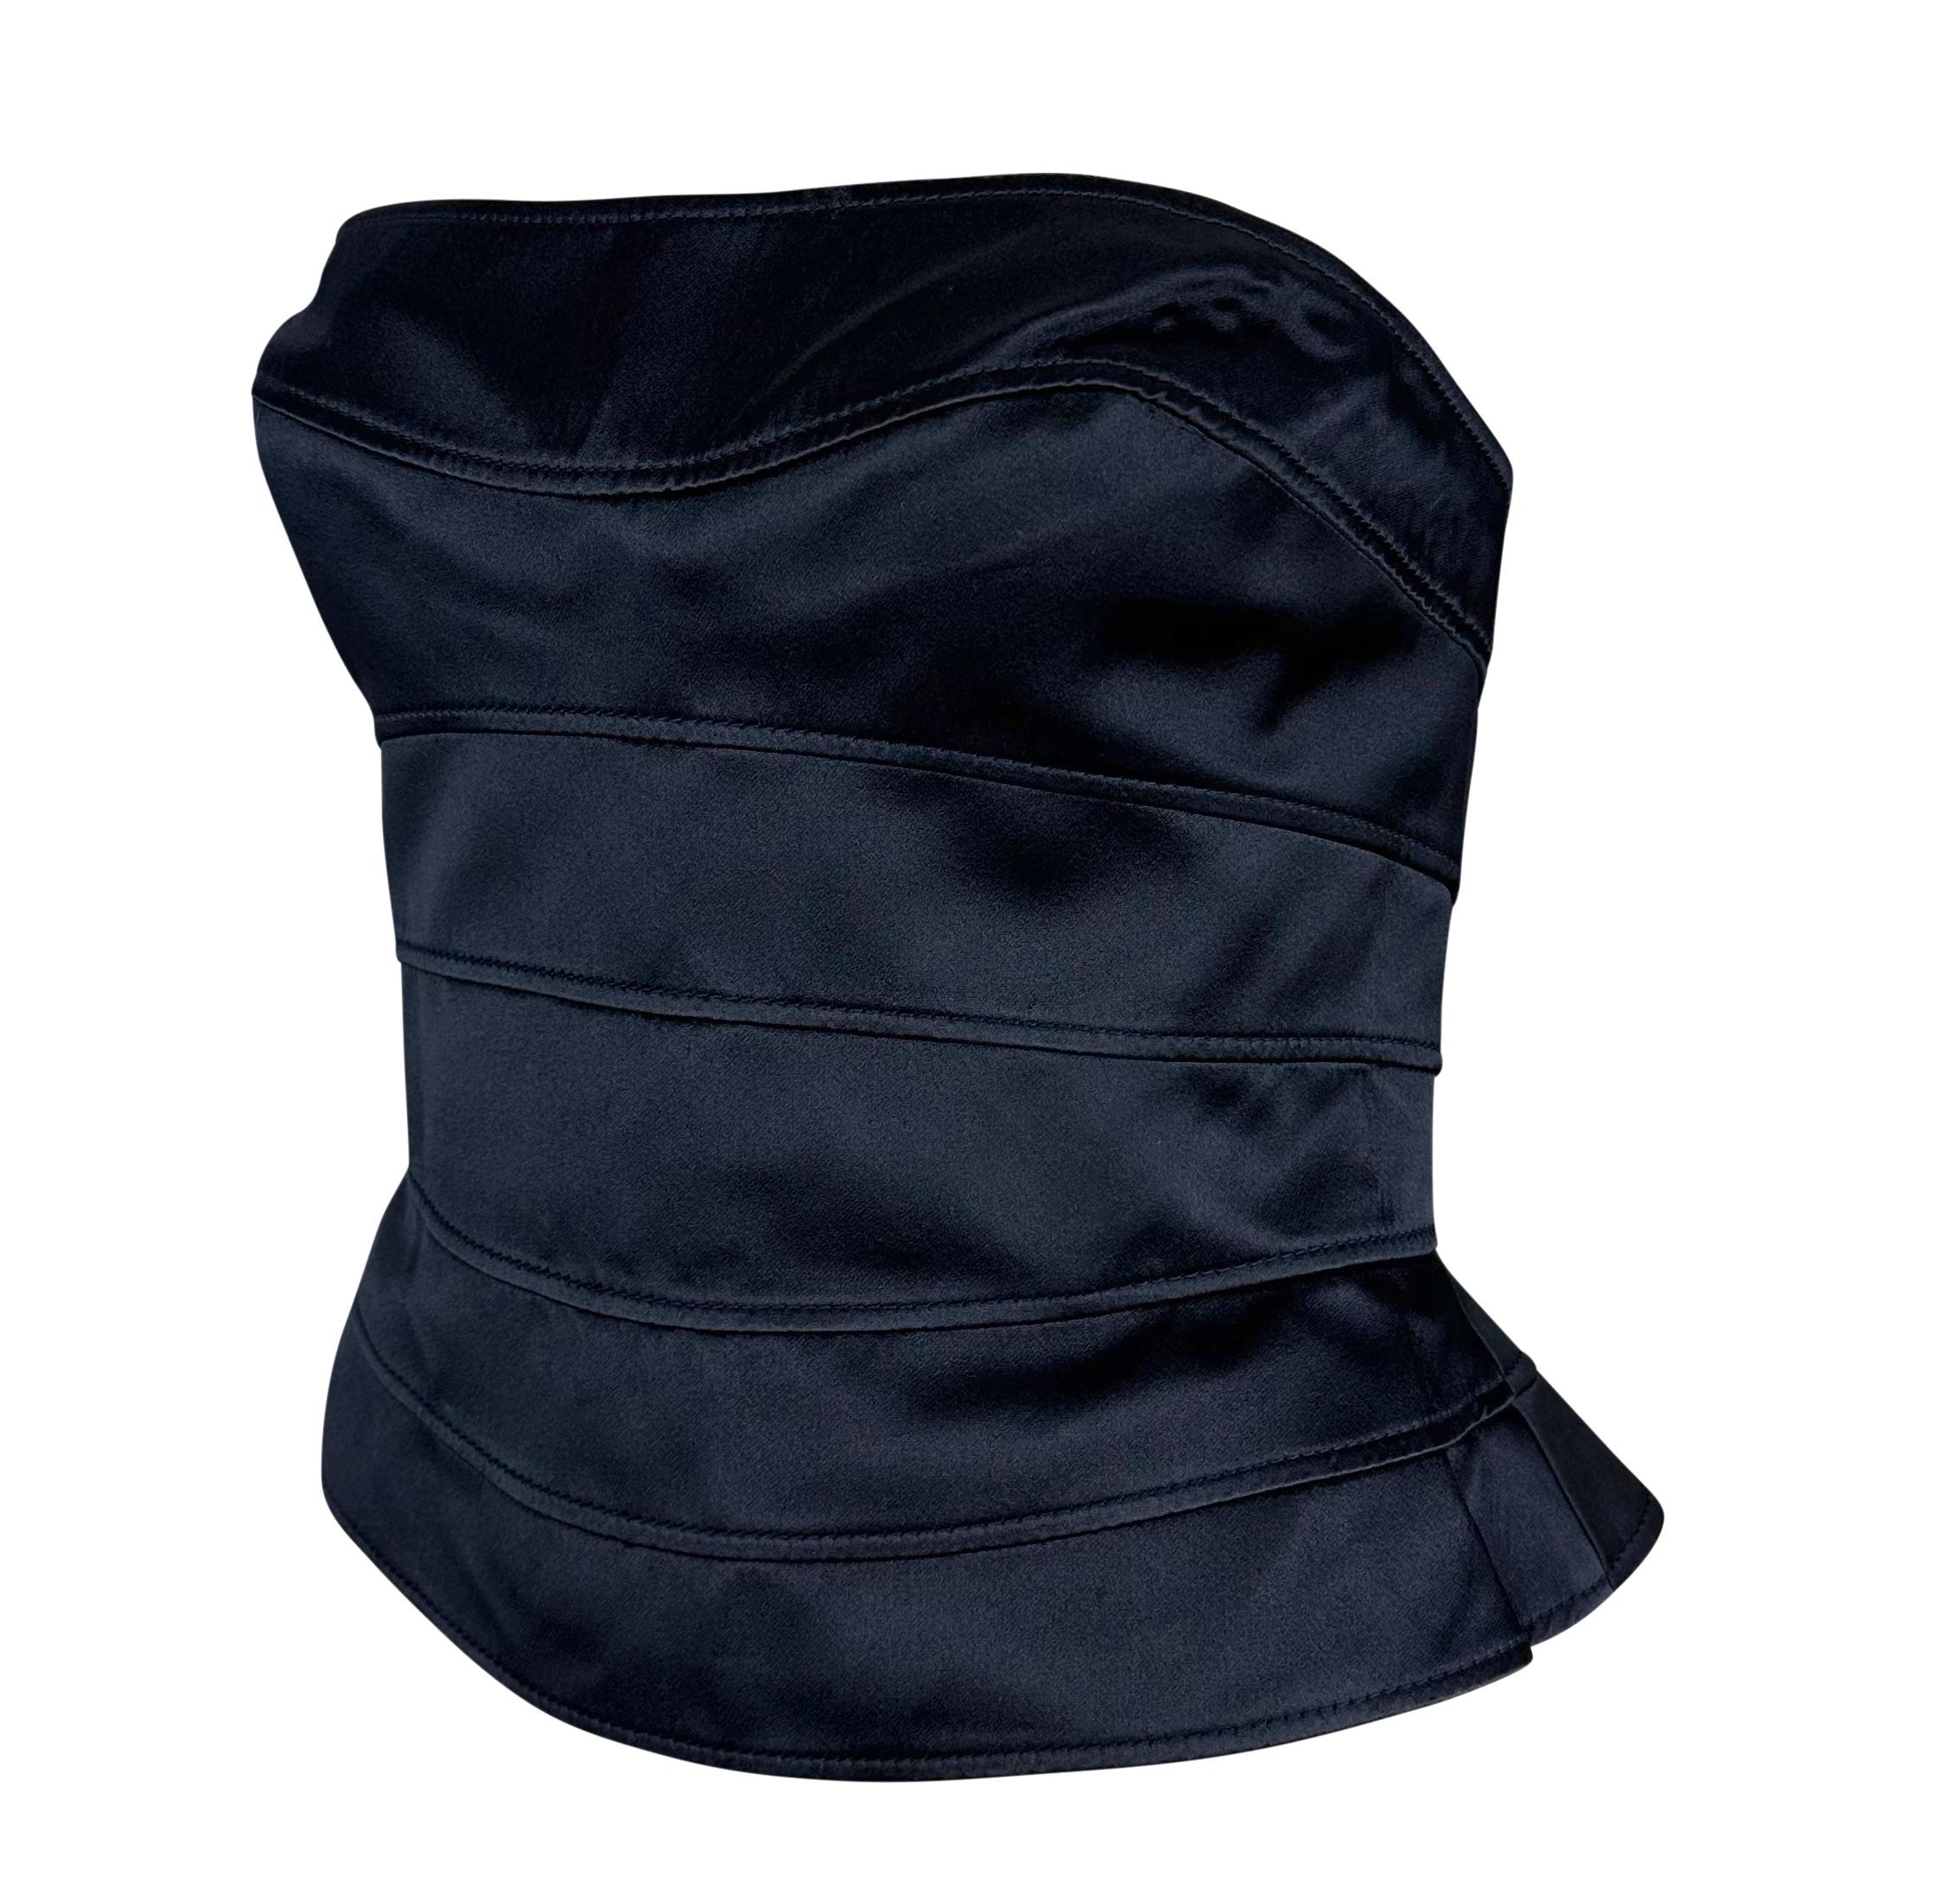 Presenting a fabulous black silk satin Thierry Mugler strapless corset top designed by Manfred Mugler. From the 1990s, this stunning top is constructed entirely of horizontal navy silk satin panels. This Thierry Mugler creation perfectly accentuates